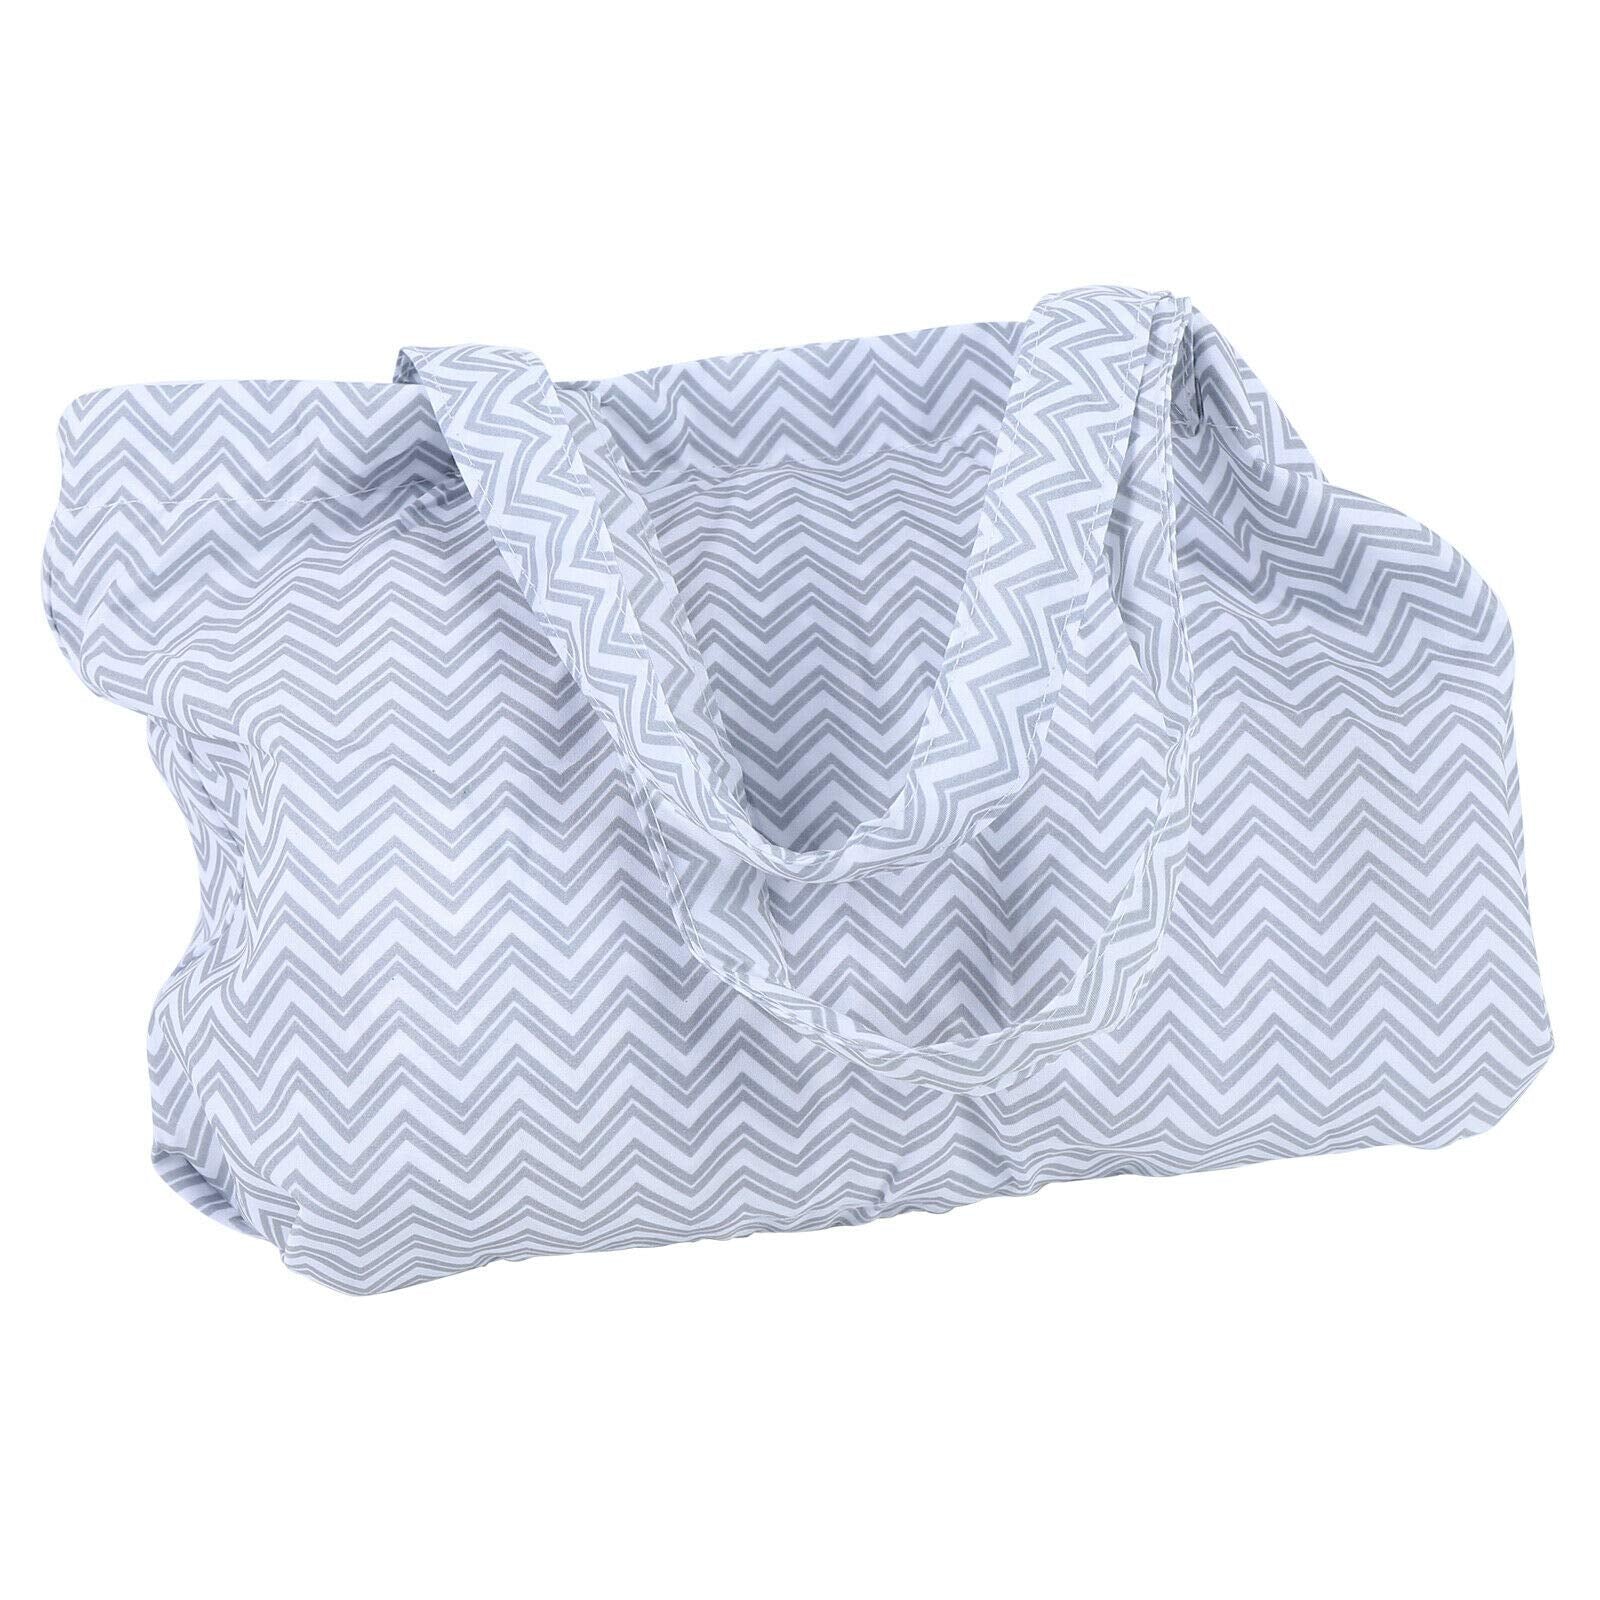 2-in-1 Shopping Cart Cover for Baby